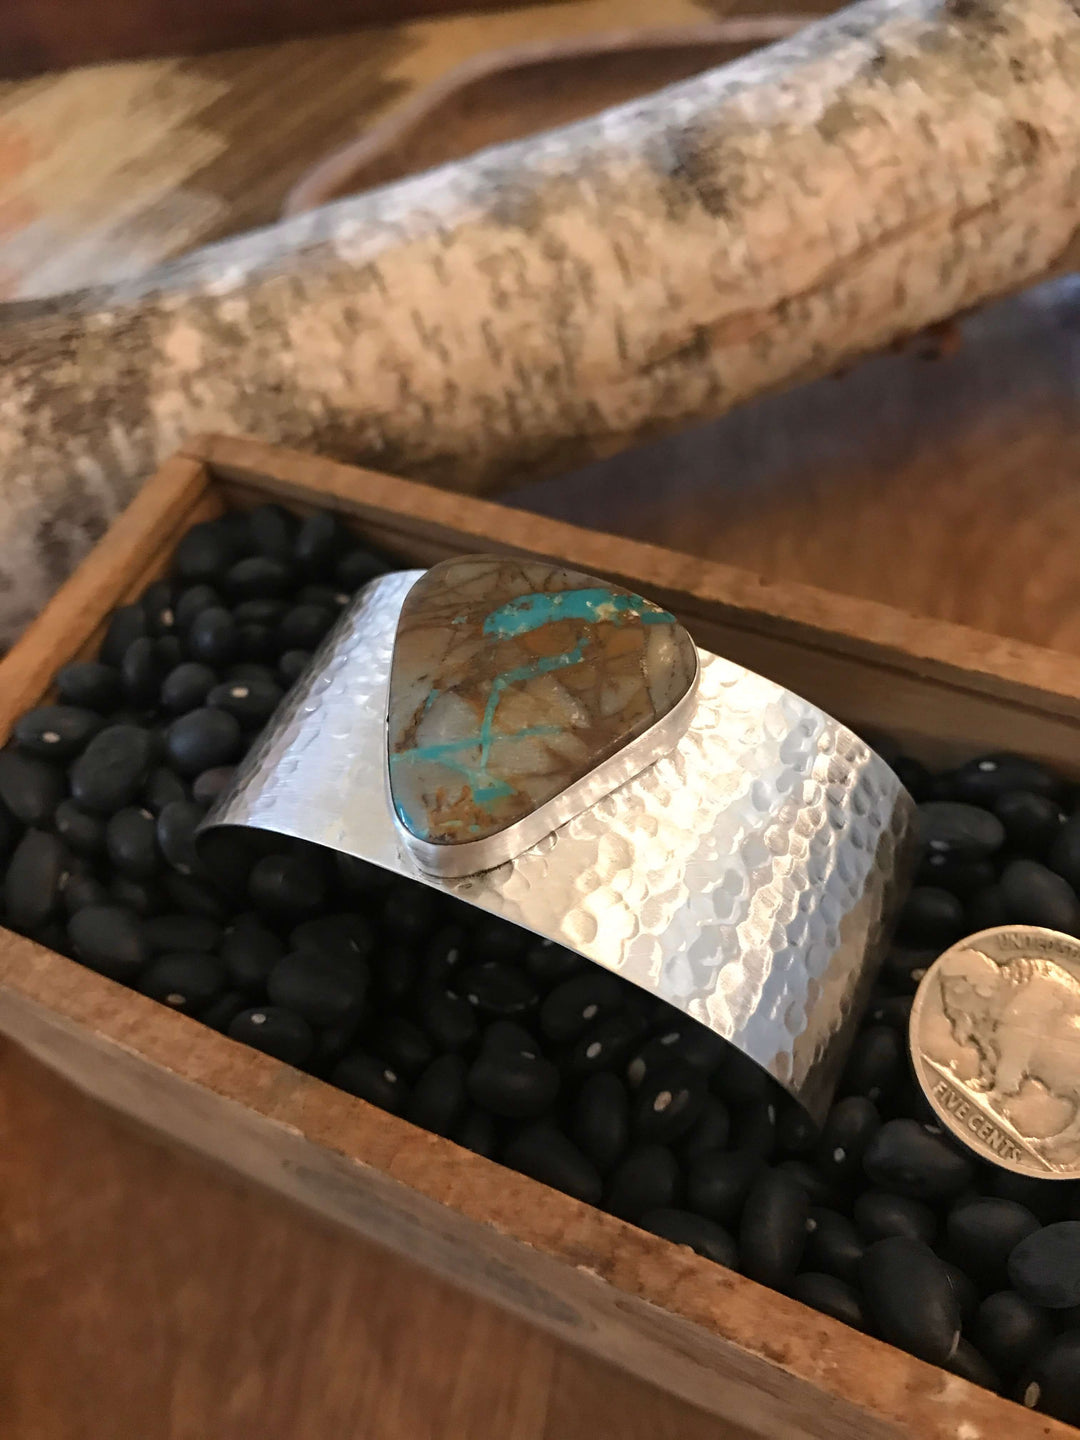 The Belle River Royston Turquoise Cuff, 4-Bracelets & Cuffs-Calli Co., Turquoise and Silver Jewelry, Native American Handmade, Zuni Tribe, Navajo Tribe, Brock Texas